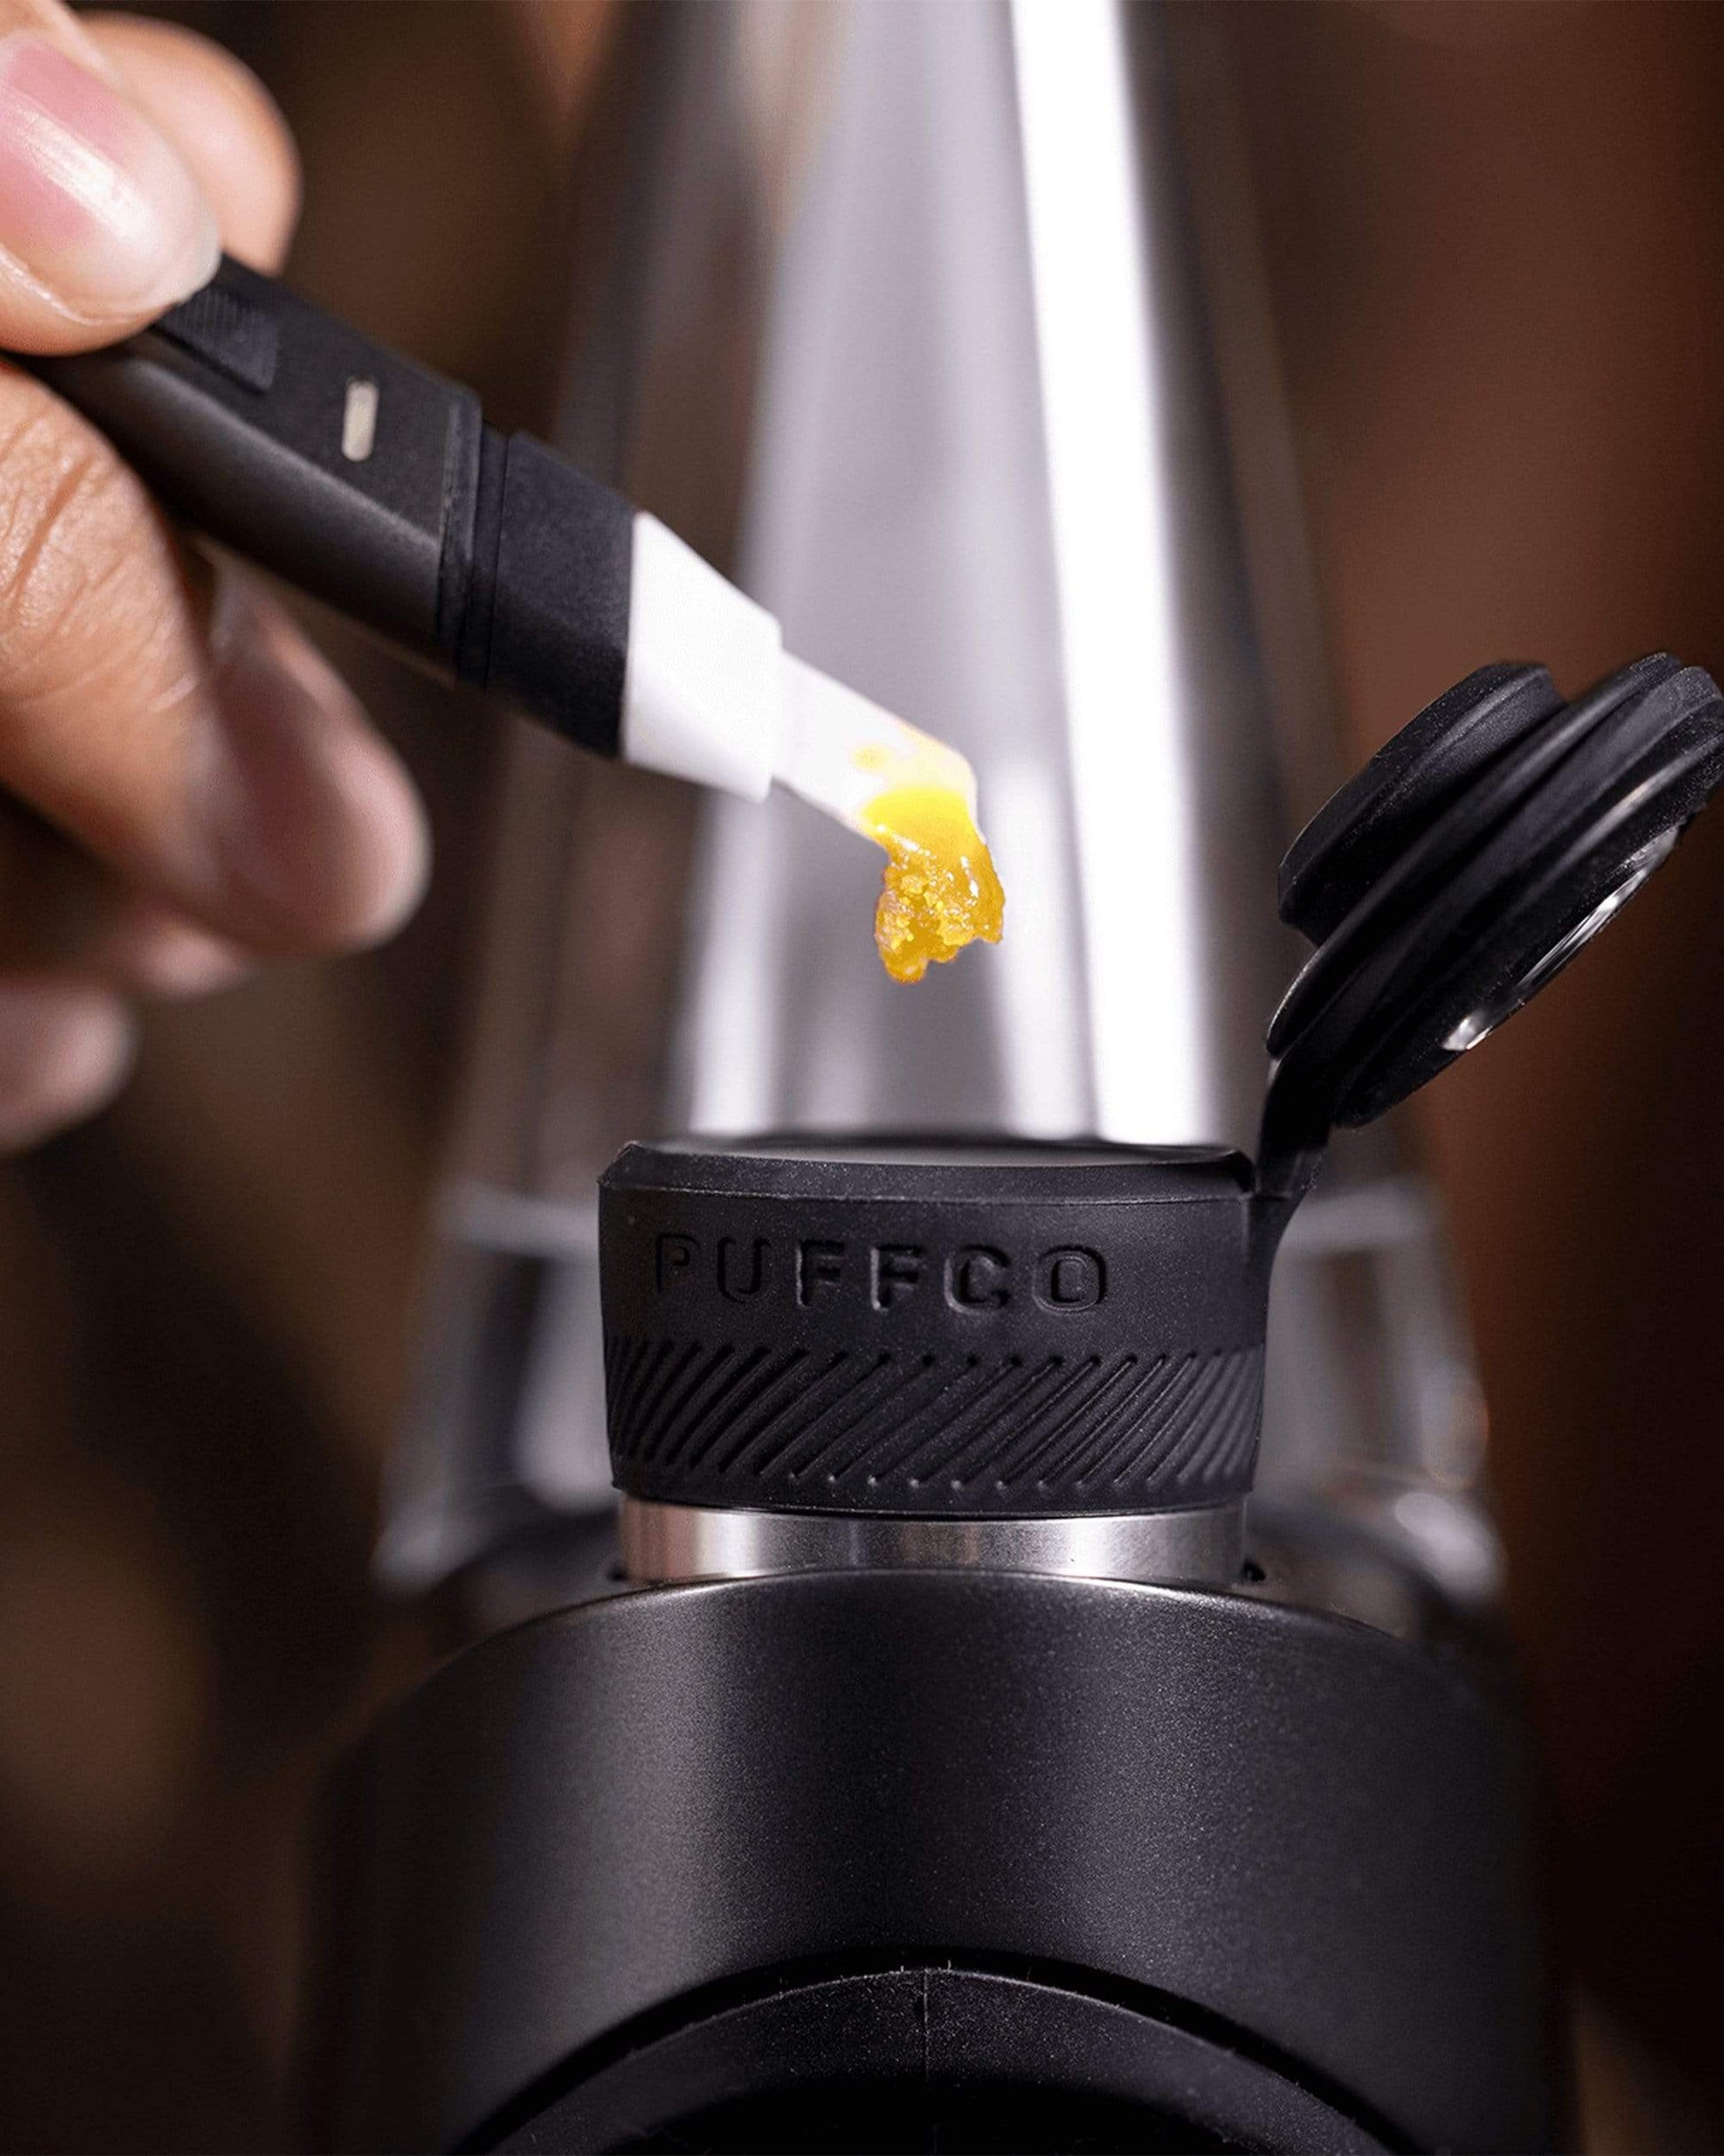 Puffco Hot Knife - The Ultimate Dab Tool for Precision and Control